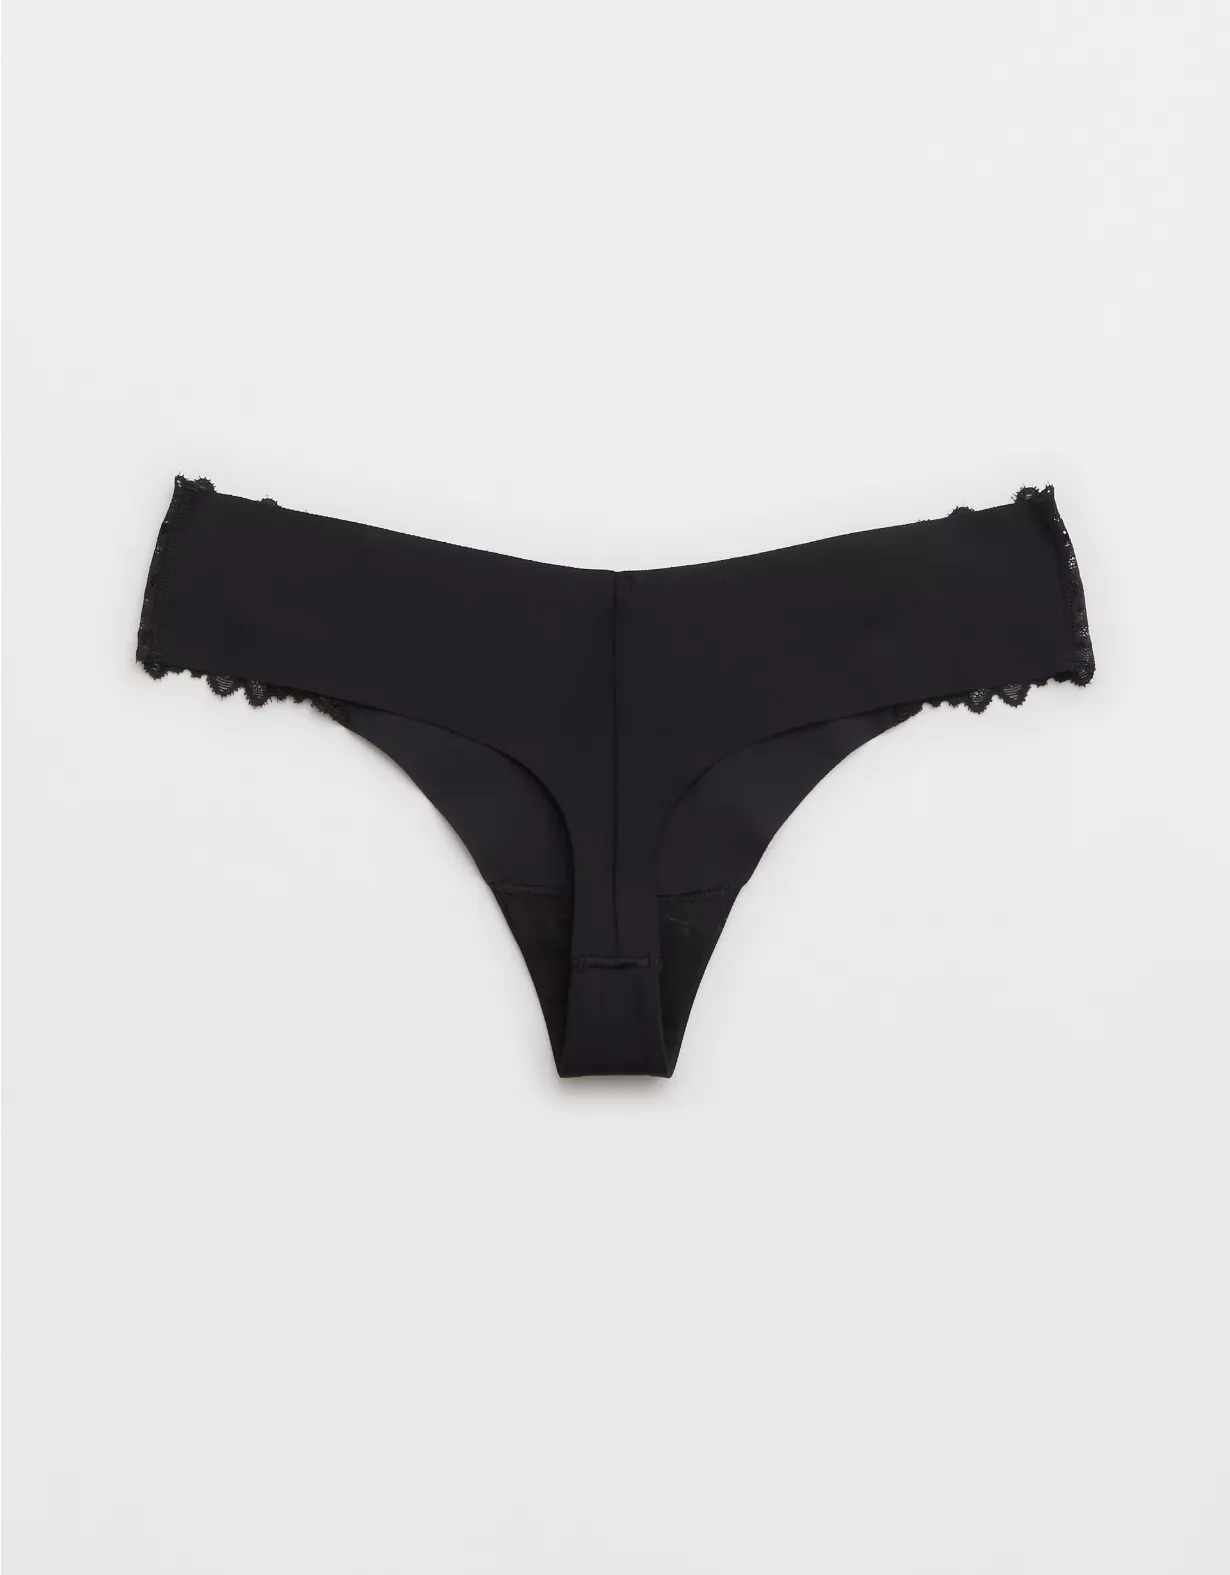 Aerie No Show Sunkissed Lace Thong Underwear